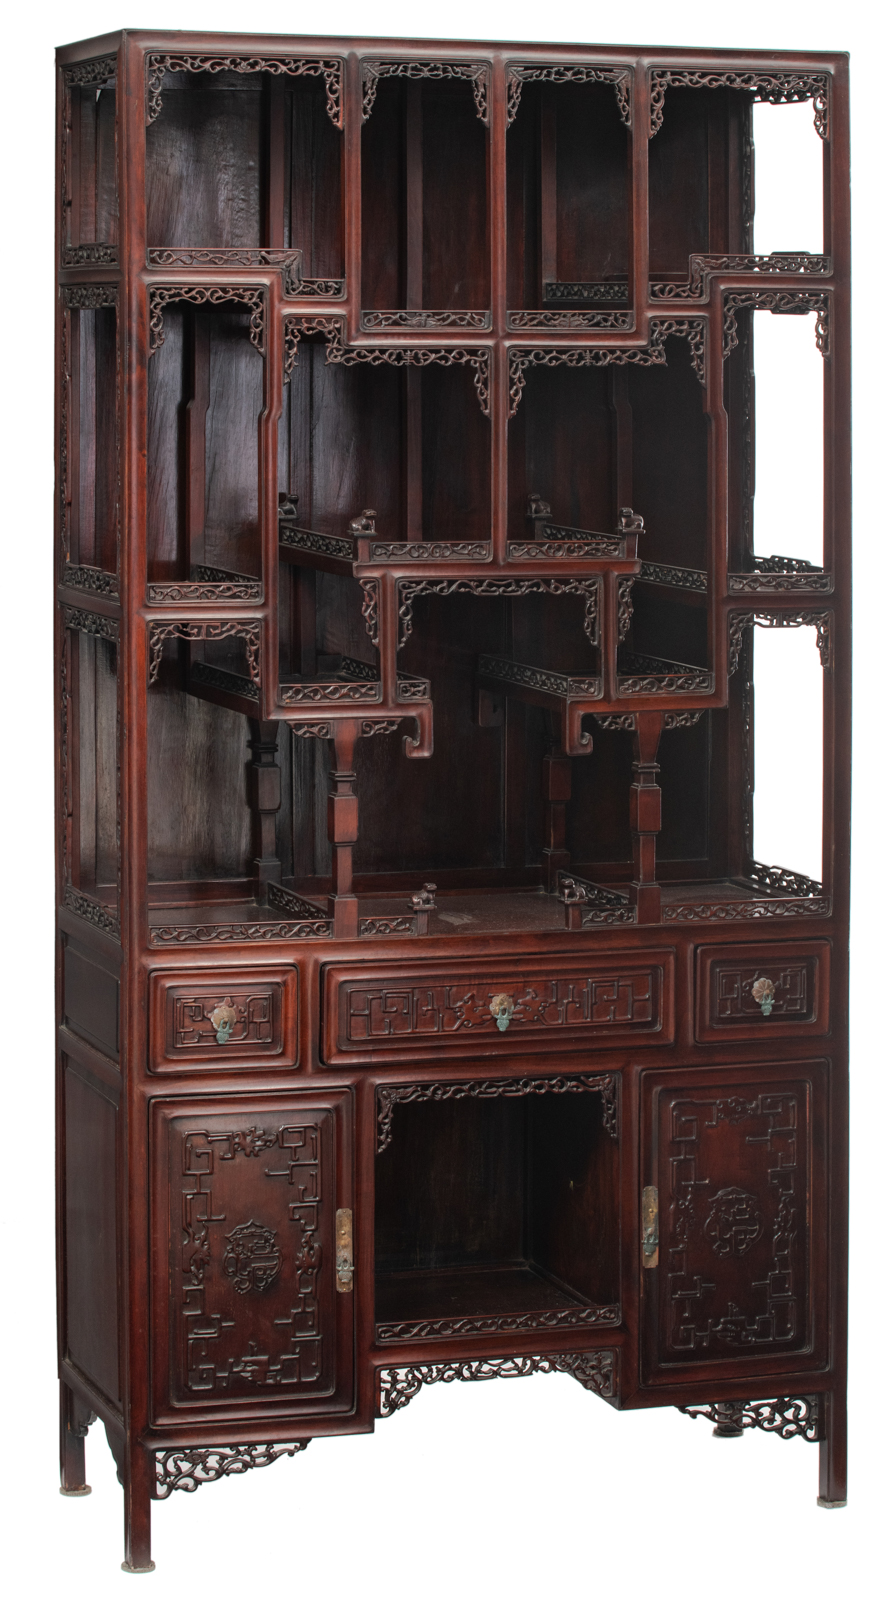 A fine Chinese rosewood display cabinet, decorated with richly carved openwork bandings and brass mo